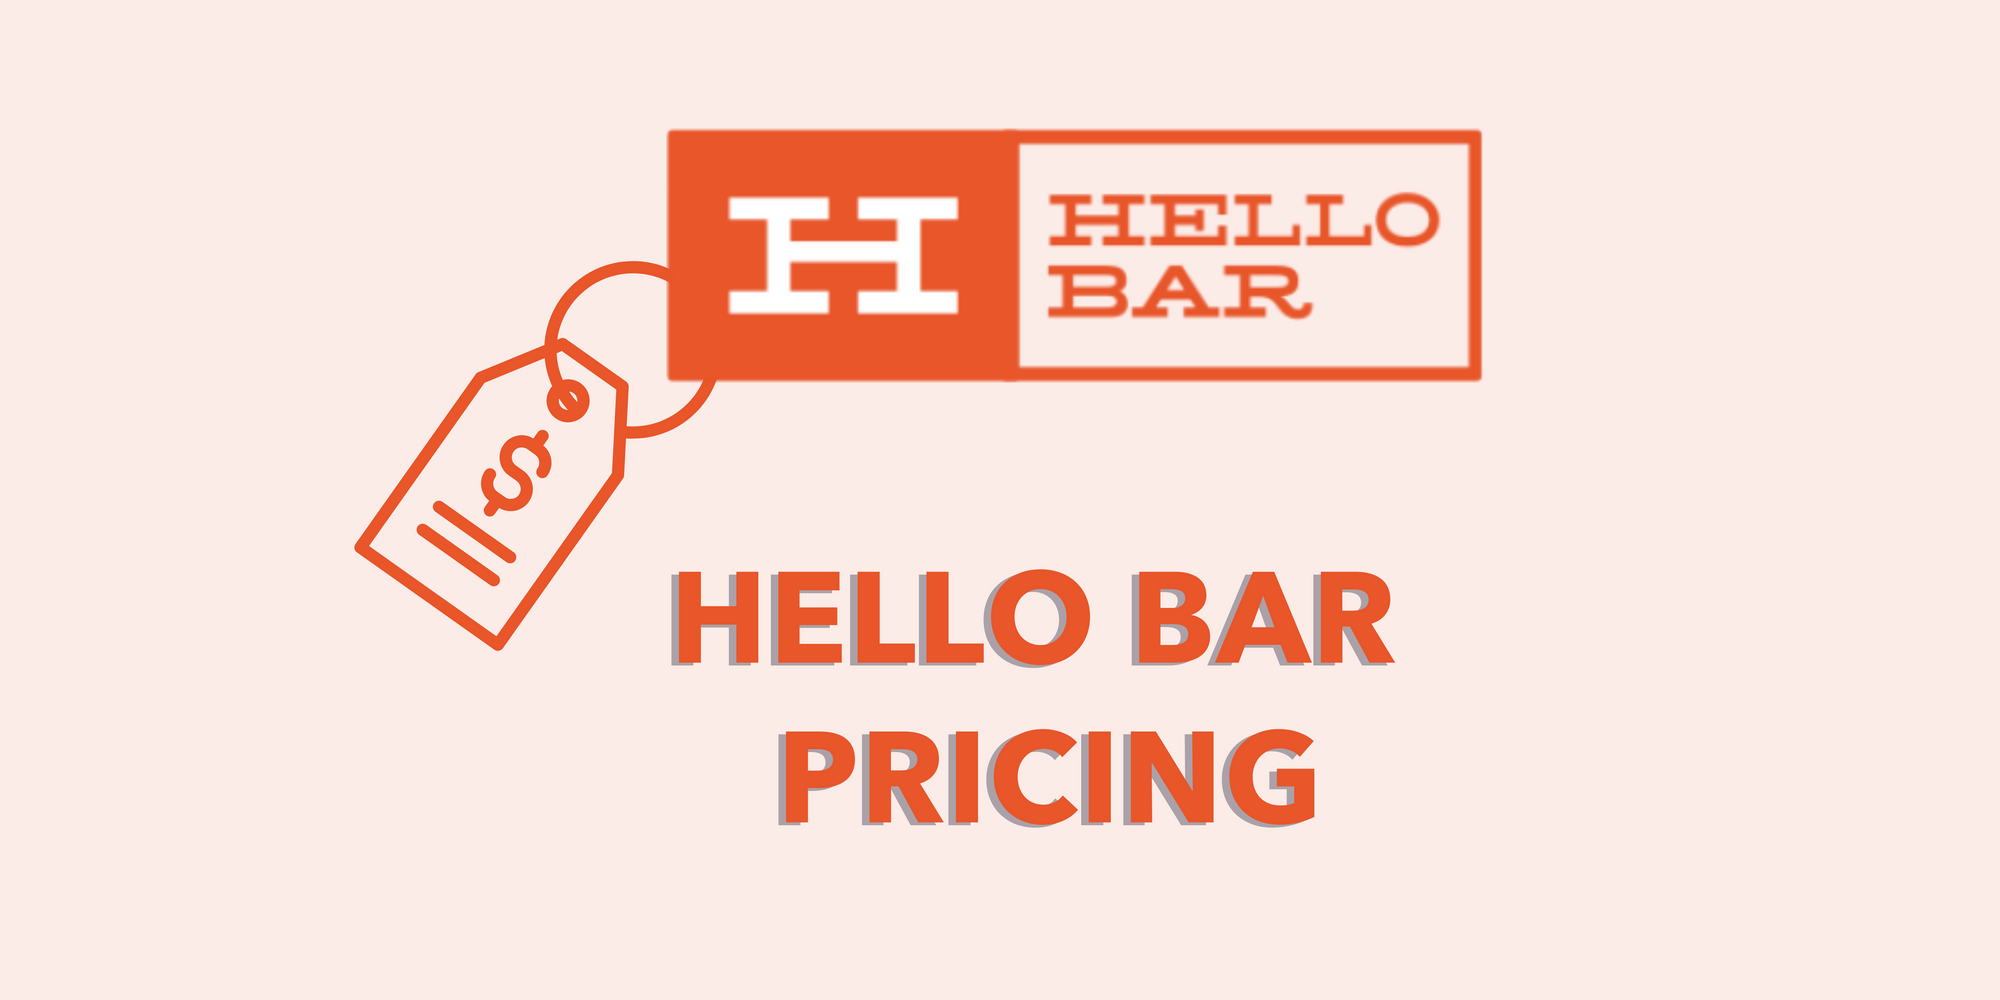 Hello Bar icon with price icon to emphasize the pricing plans on red background